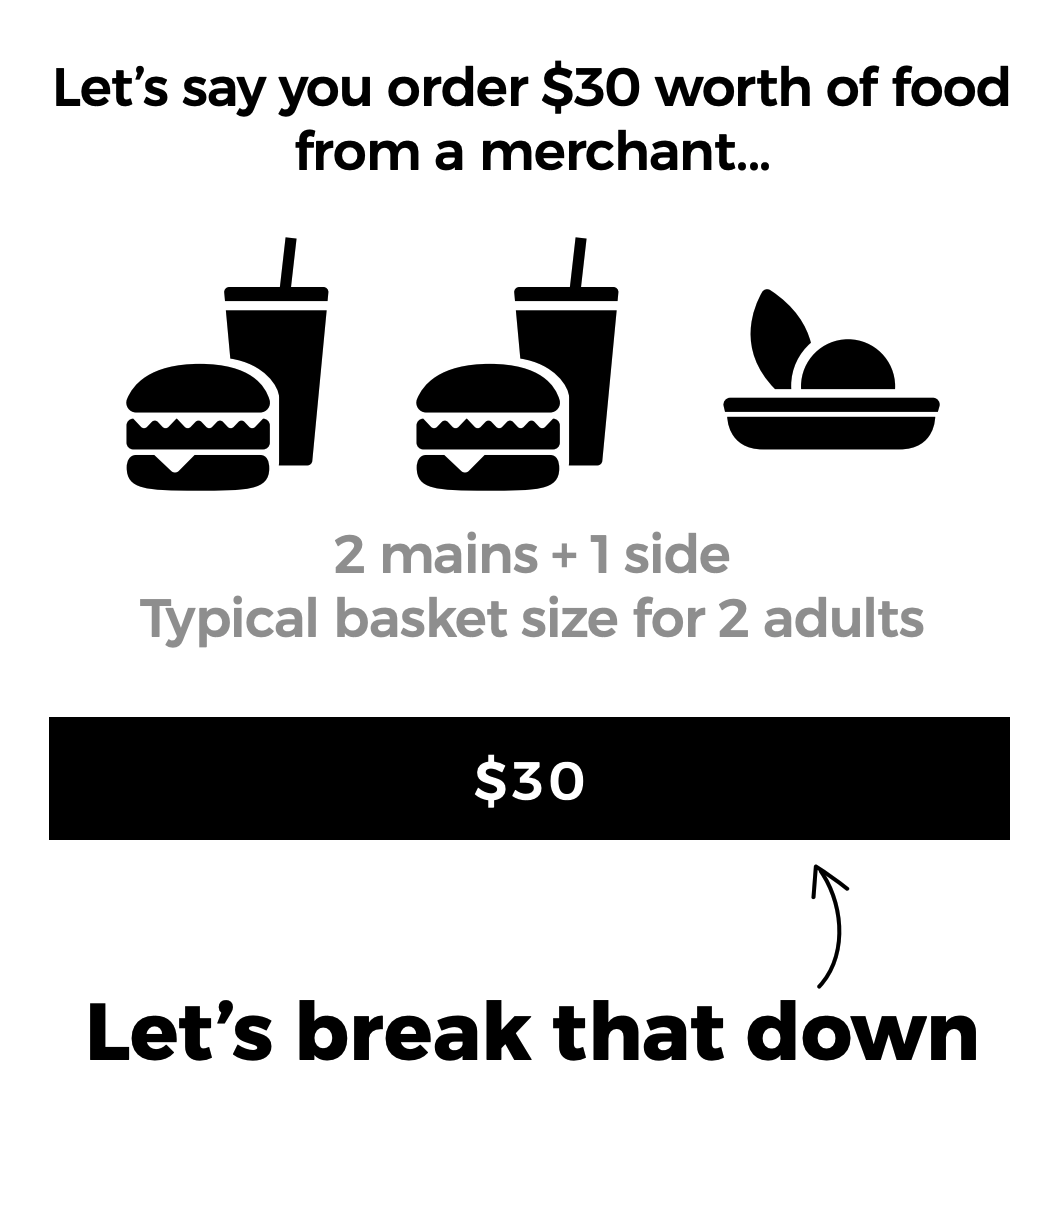 Food Delivery Infographic by Desmond Chua